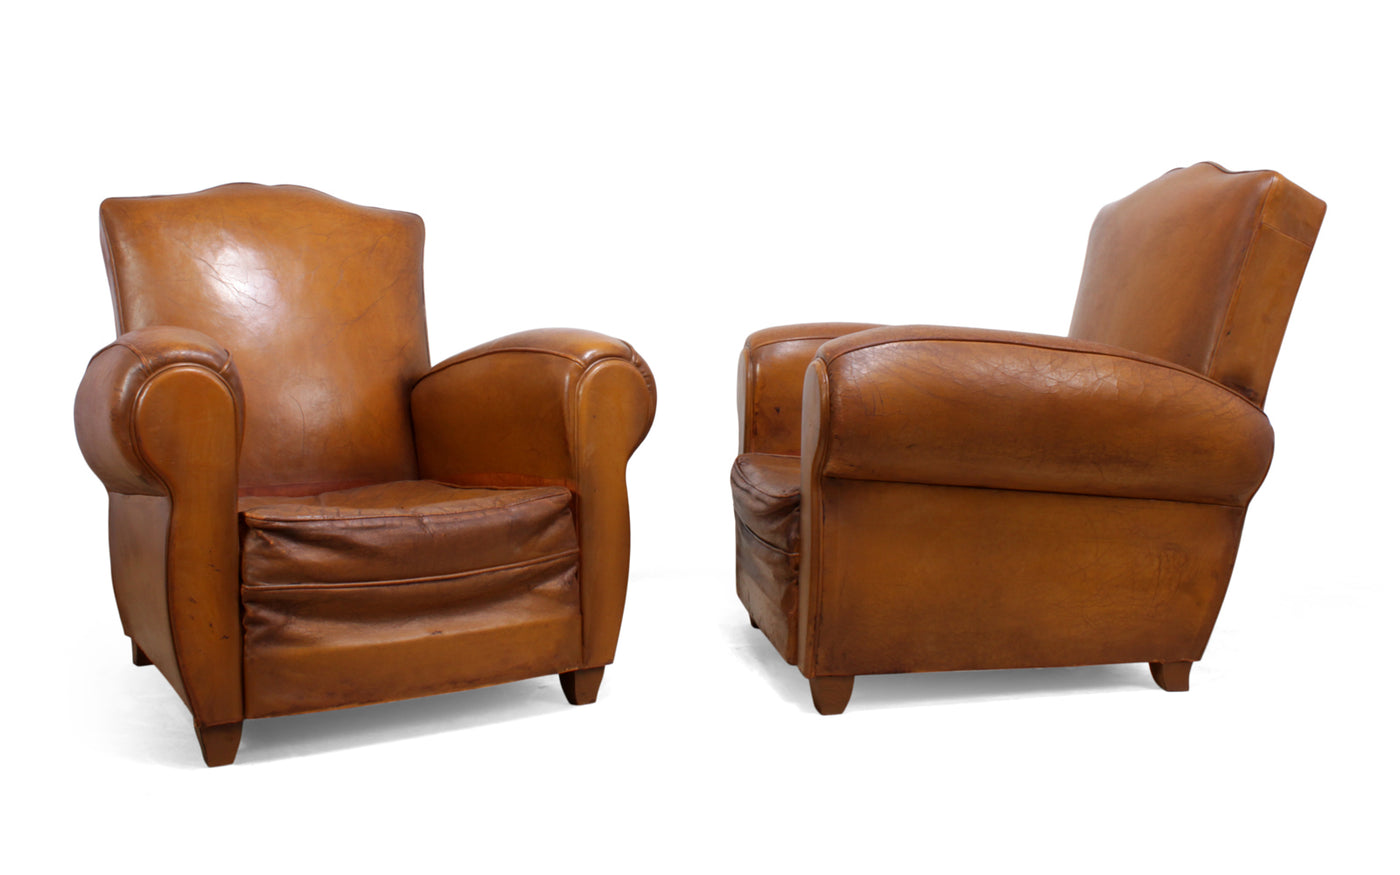 Pair of French Leather Club Chairs c1940